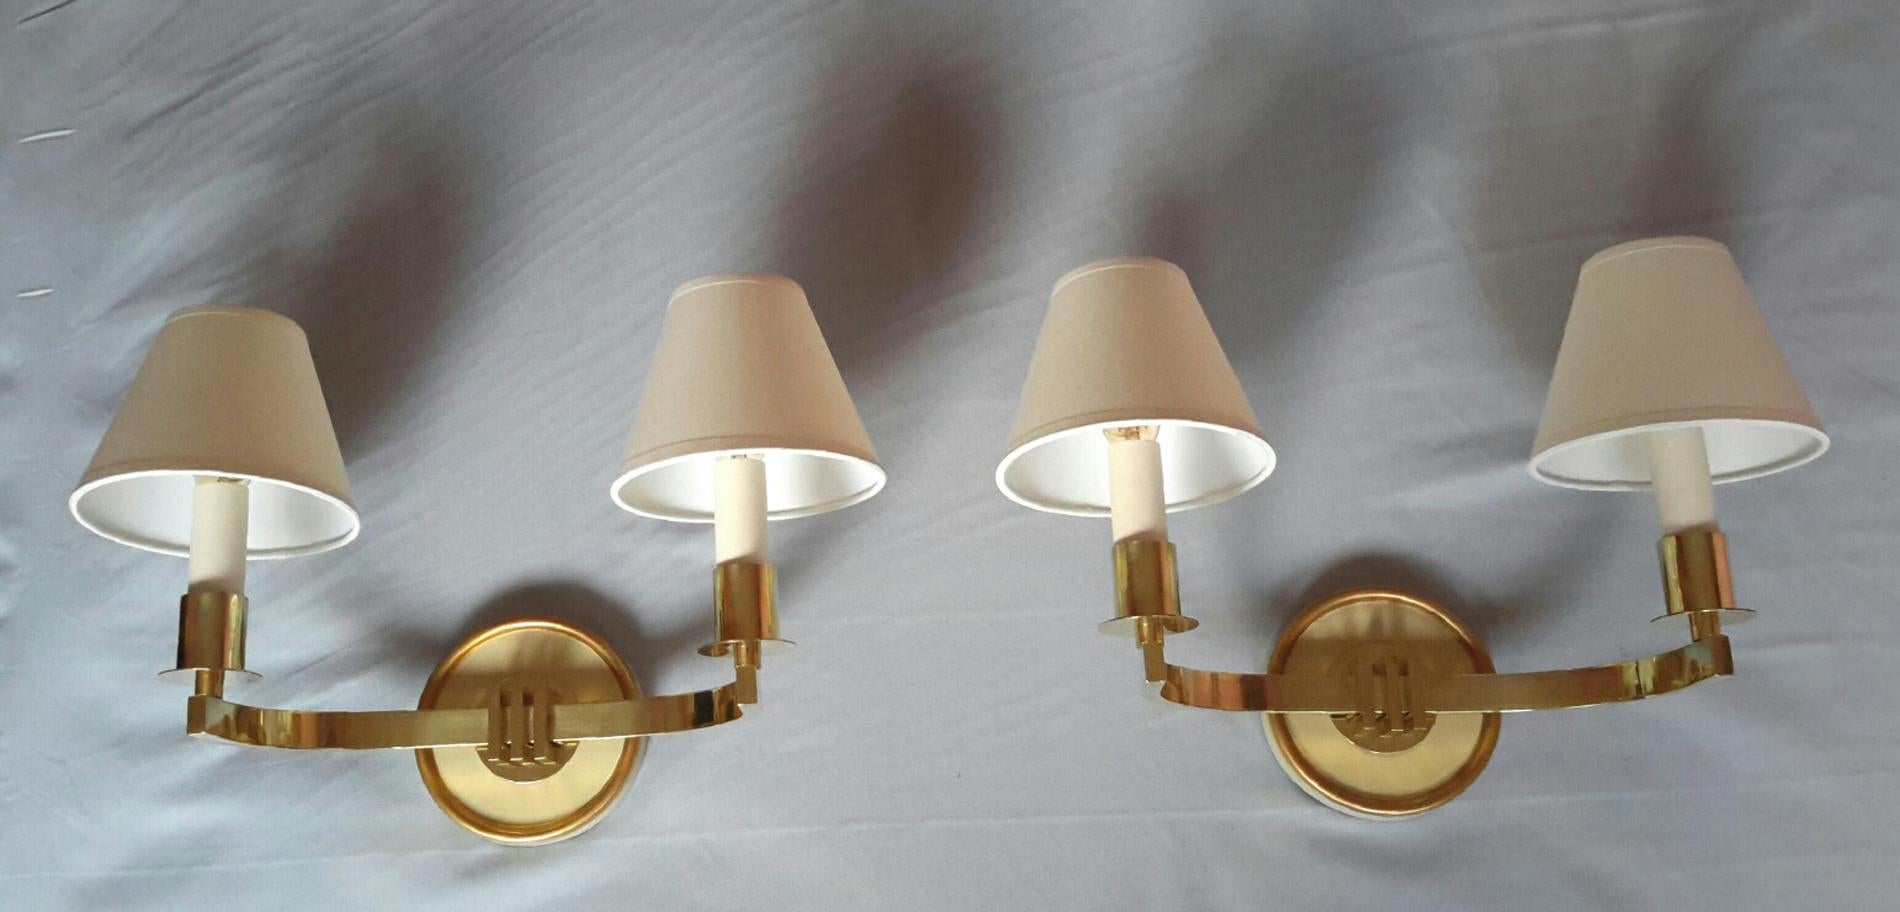 Gilt Chic Pair of French Mid-Century Modern Wall Sconces, 1950s For Sale